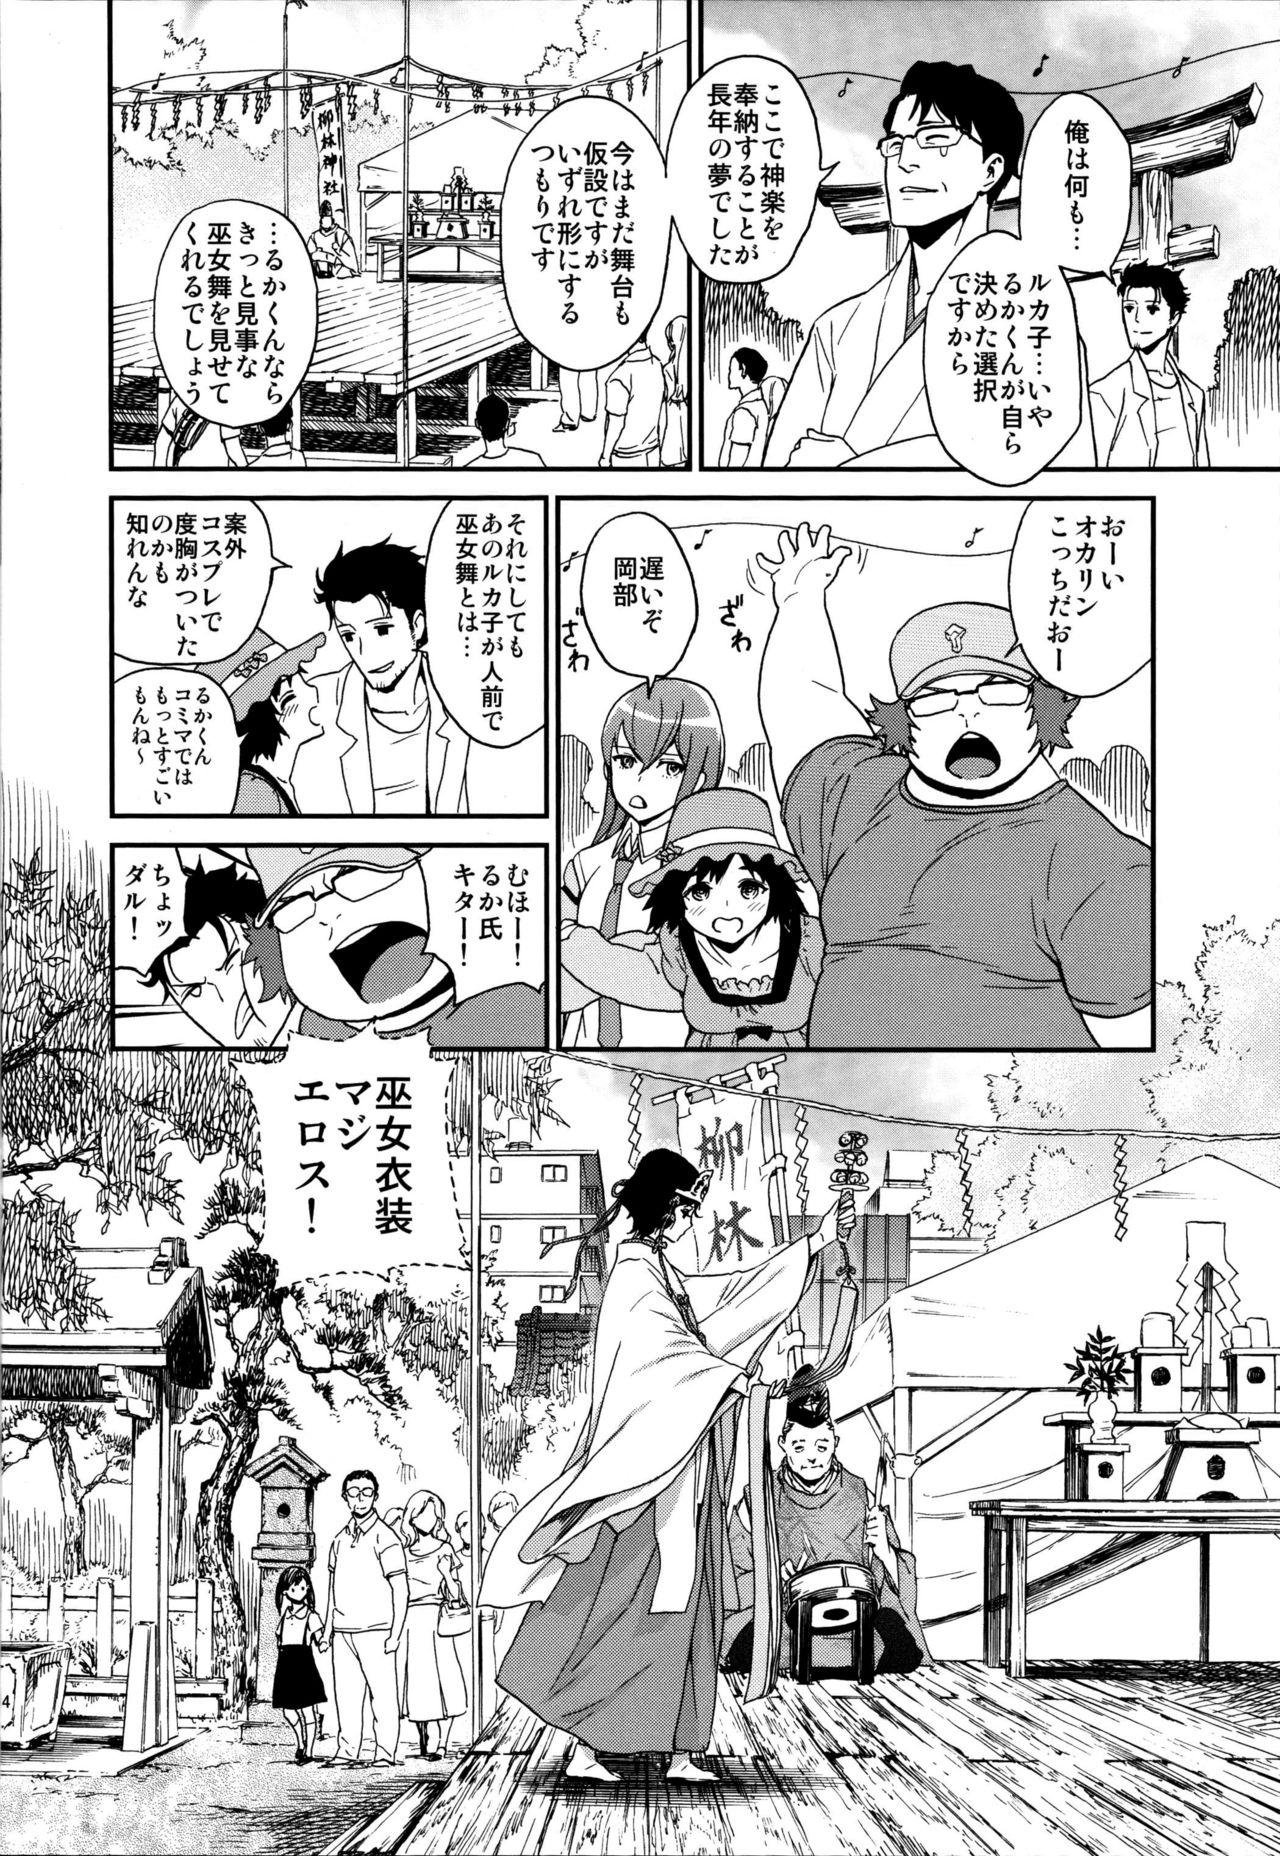 Amateurs Gone Yaotome no Chrysanthemum - Steinsgate Culona - Page 3